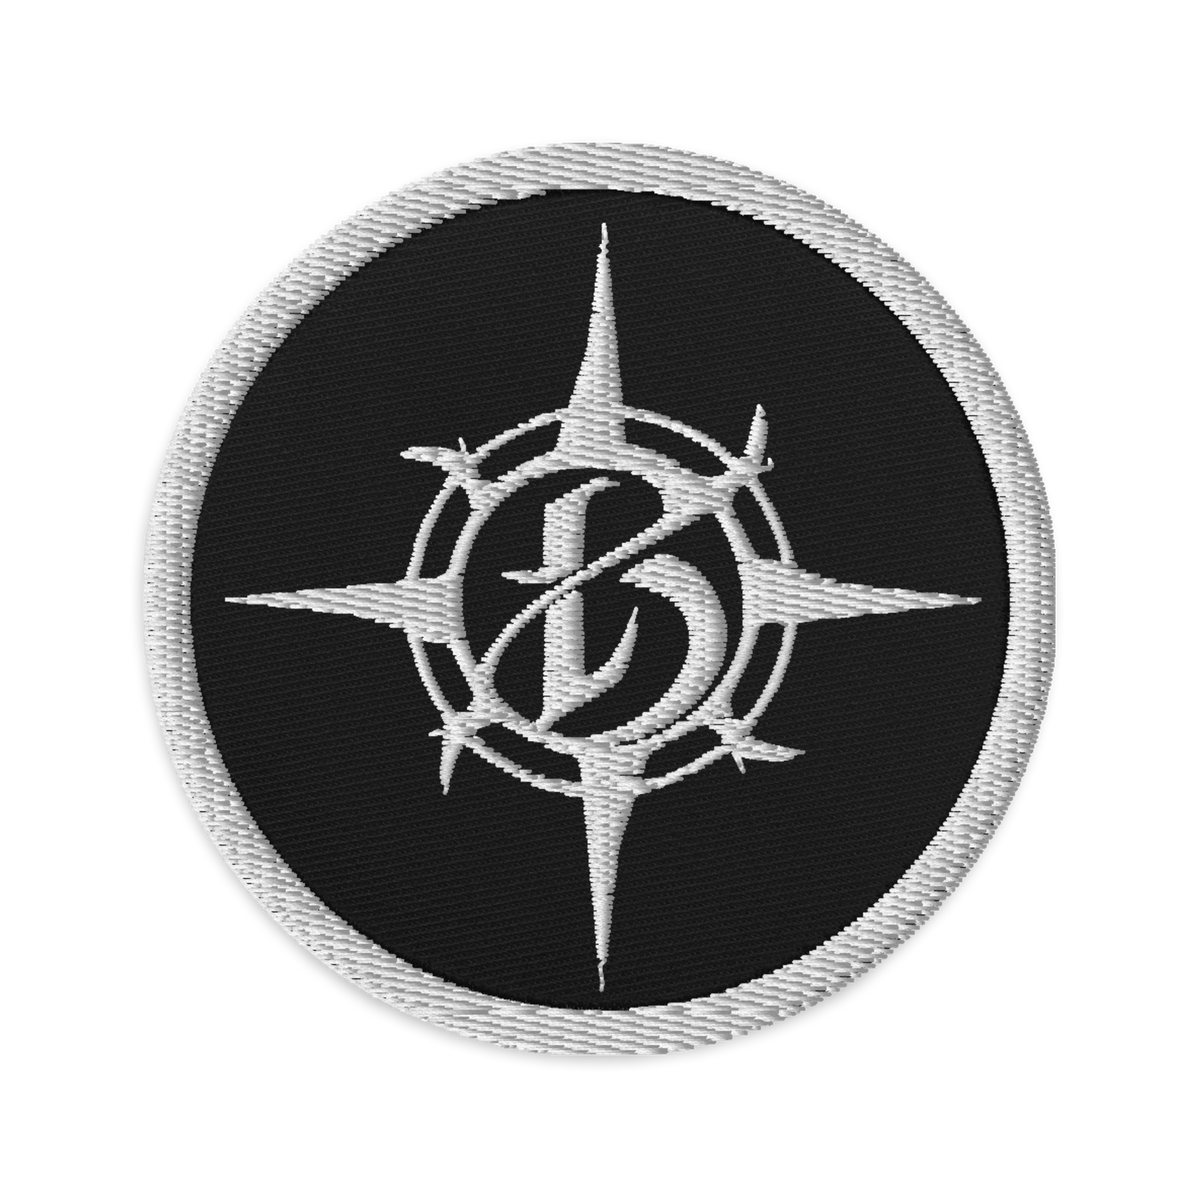 Borealis Compass Logo Embroidered Patch - White